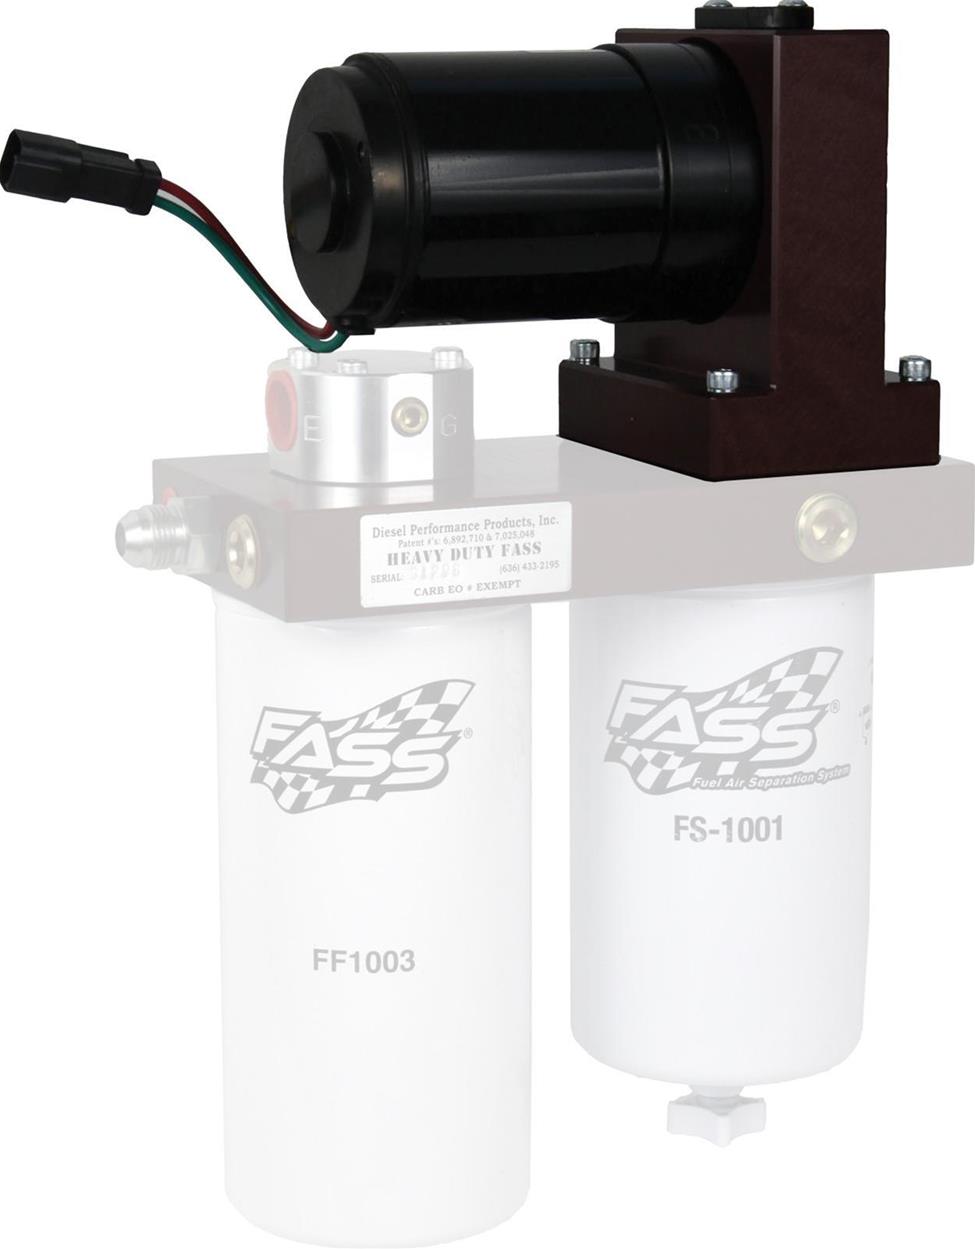 FASS Fuel Systems HD150 Series Replacement Pump RPHD-1001 